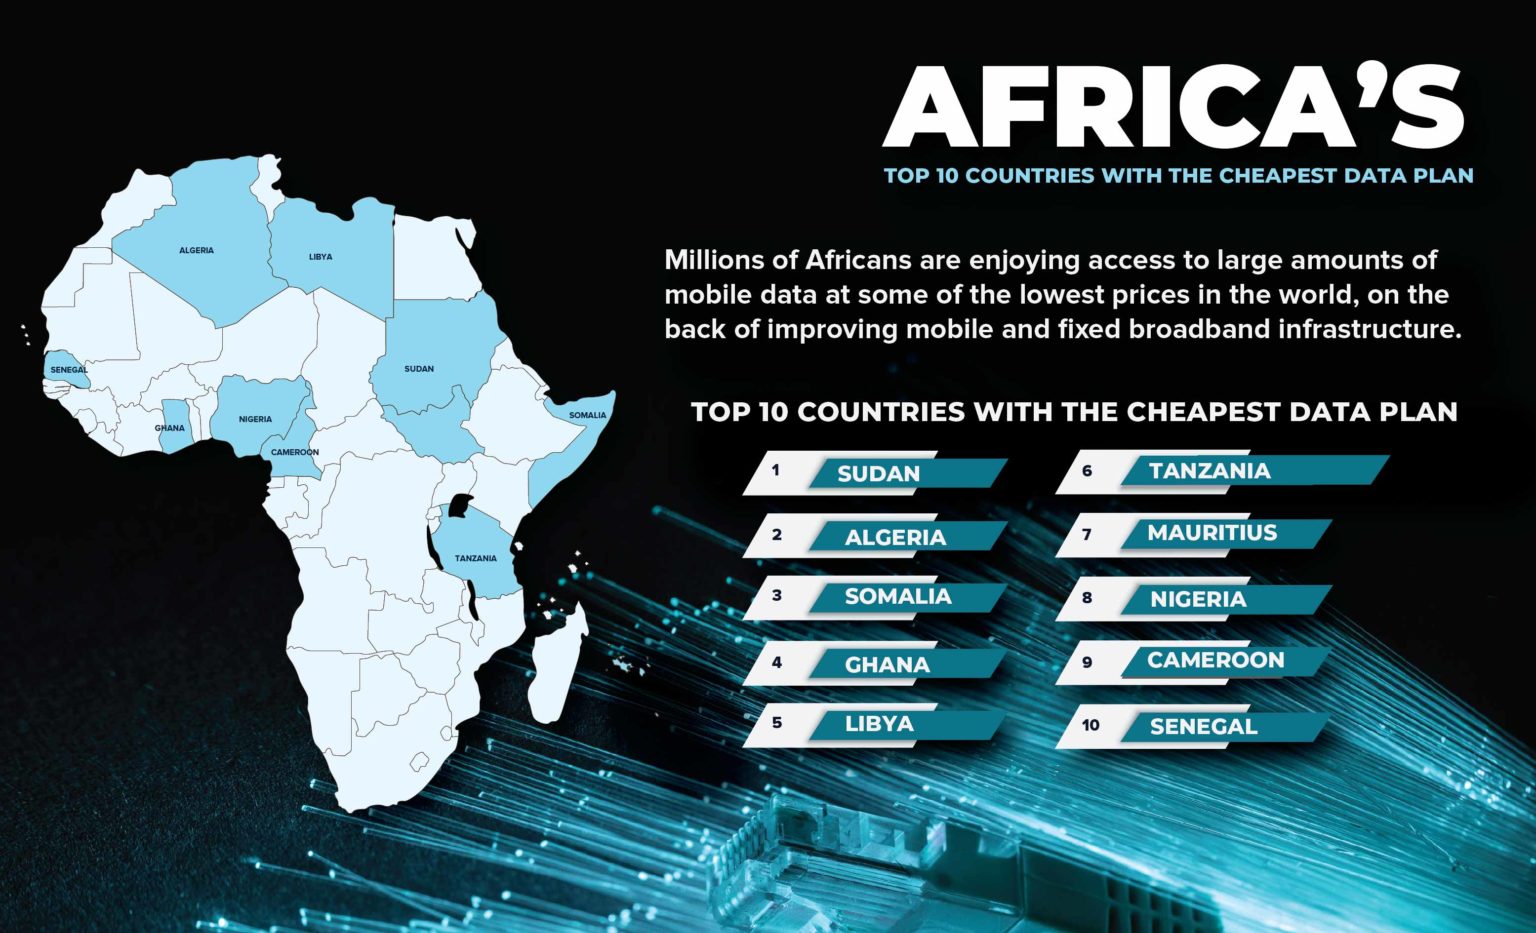 Ten African countries with the cheapest data plans